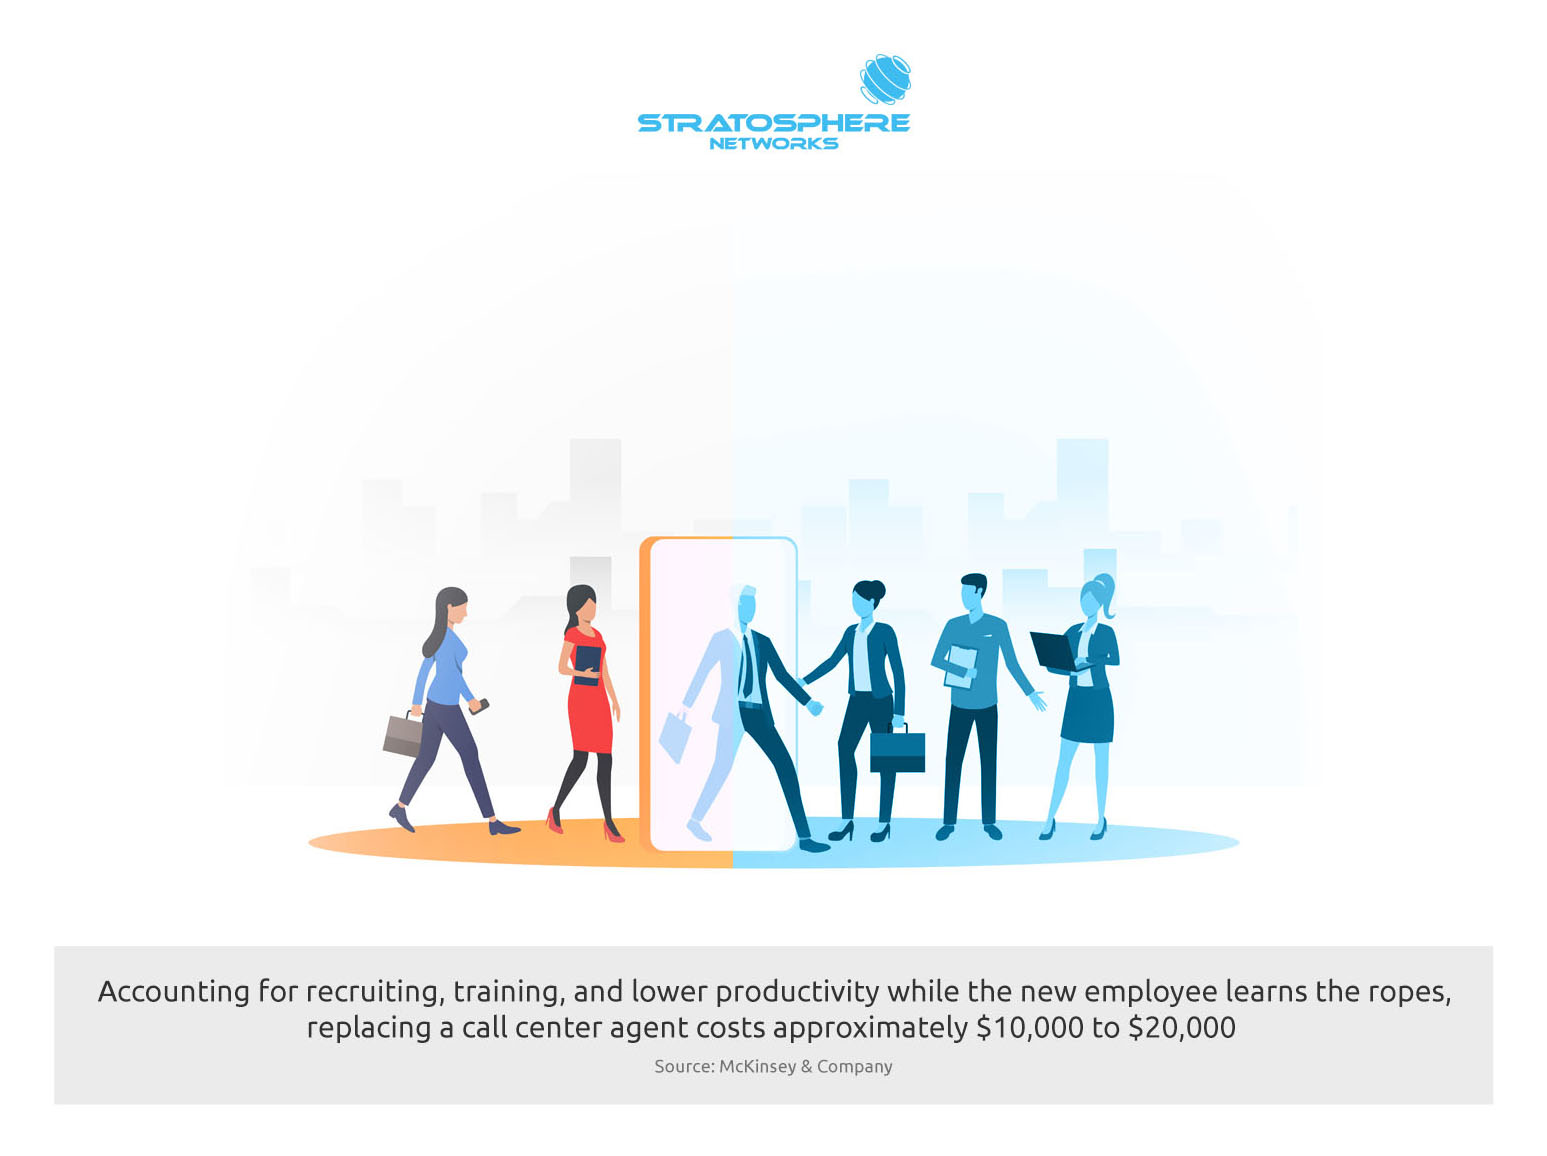 An illustration of people walking through a doorway from left to right. Text below the illustration states that accounting for recruiting, training, and lower productivity while the new employee learns the ropes, replacing a call center agent costs approximately $10,000 to $20,000 (Source: McKinsey & Company).